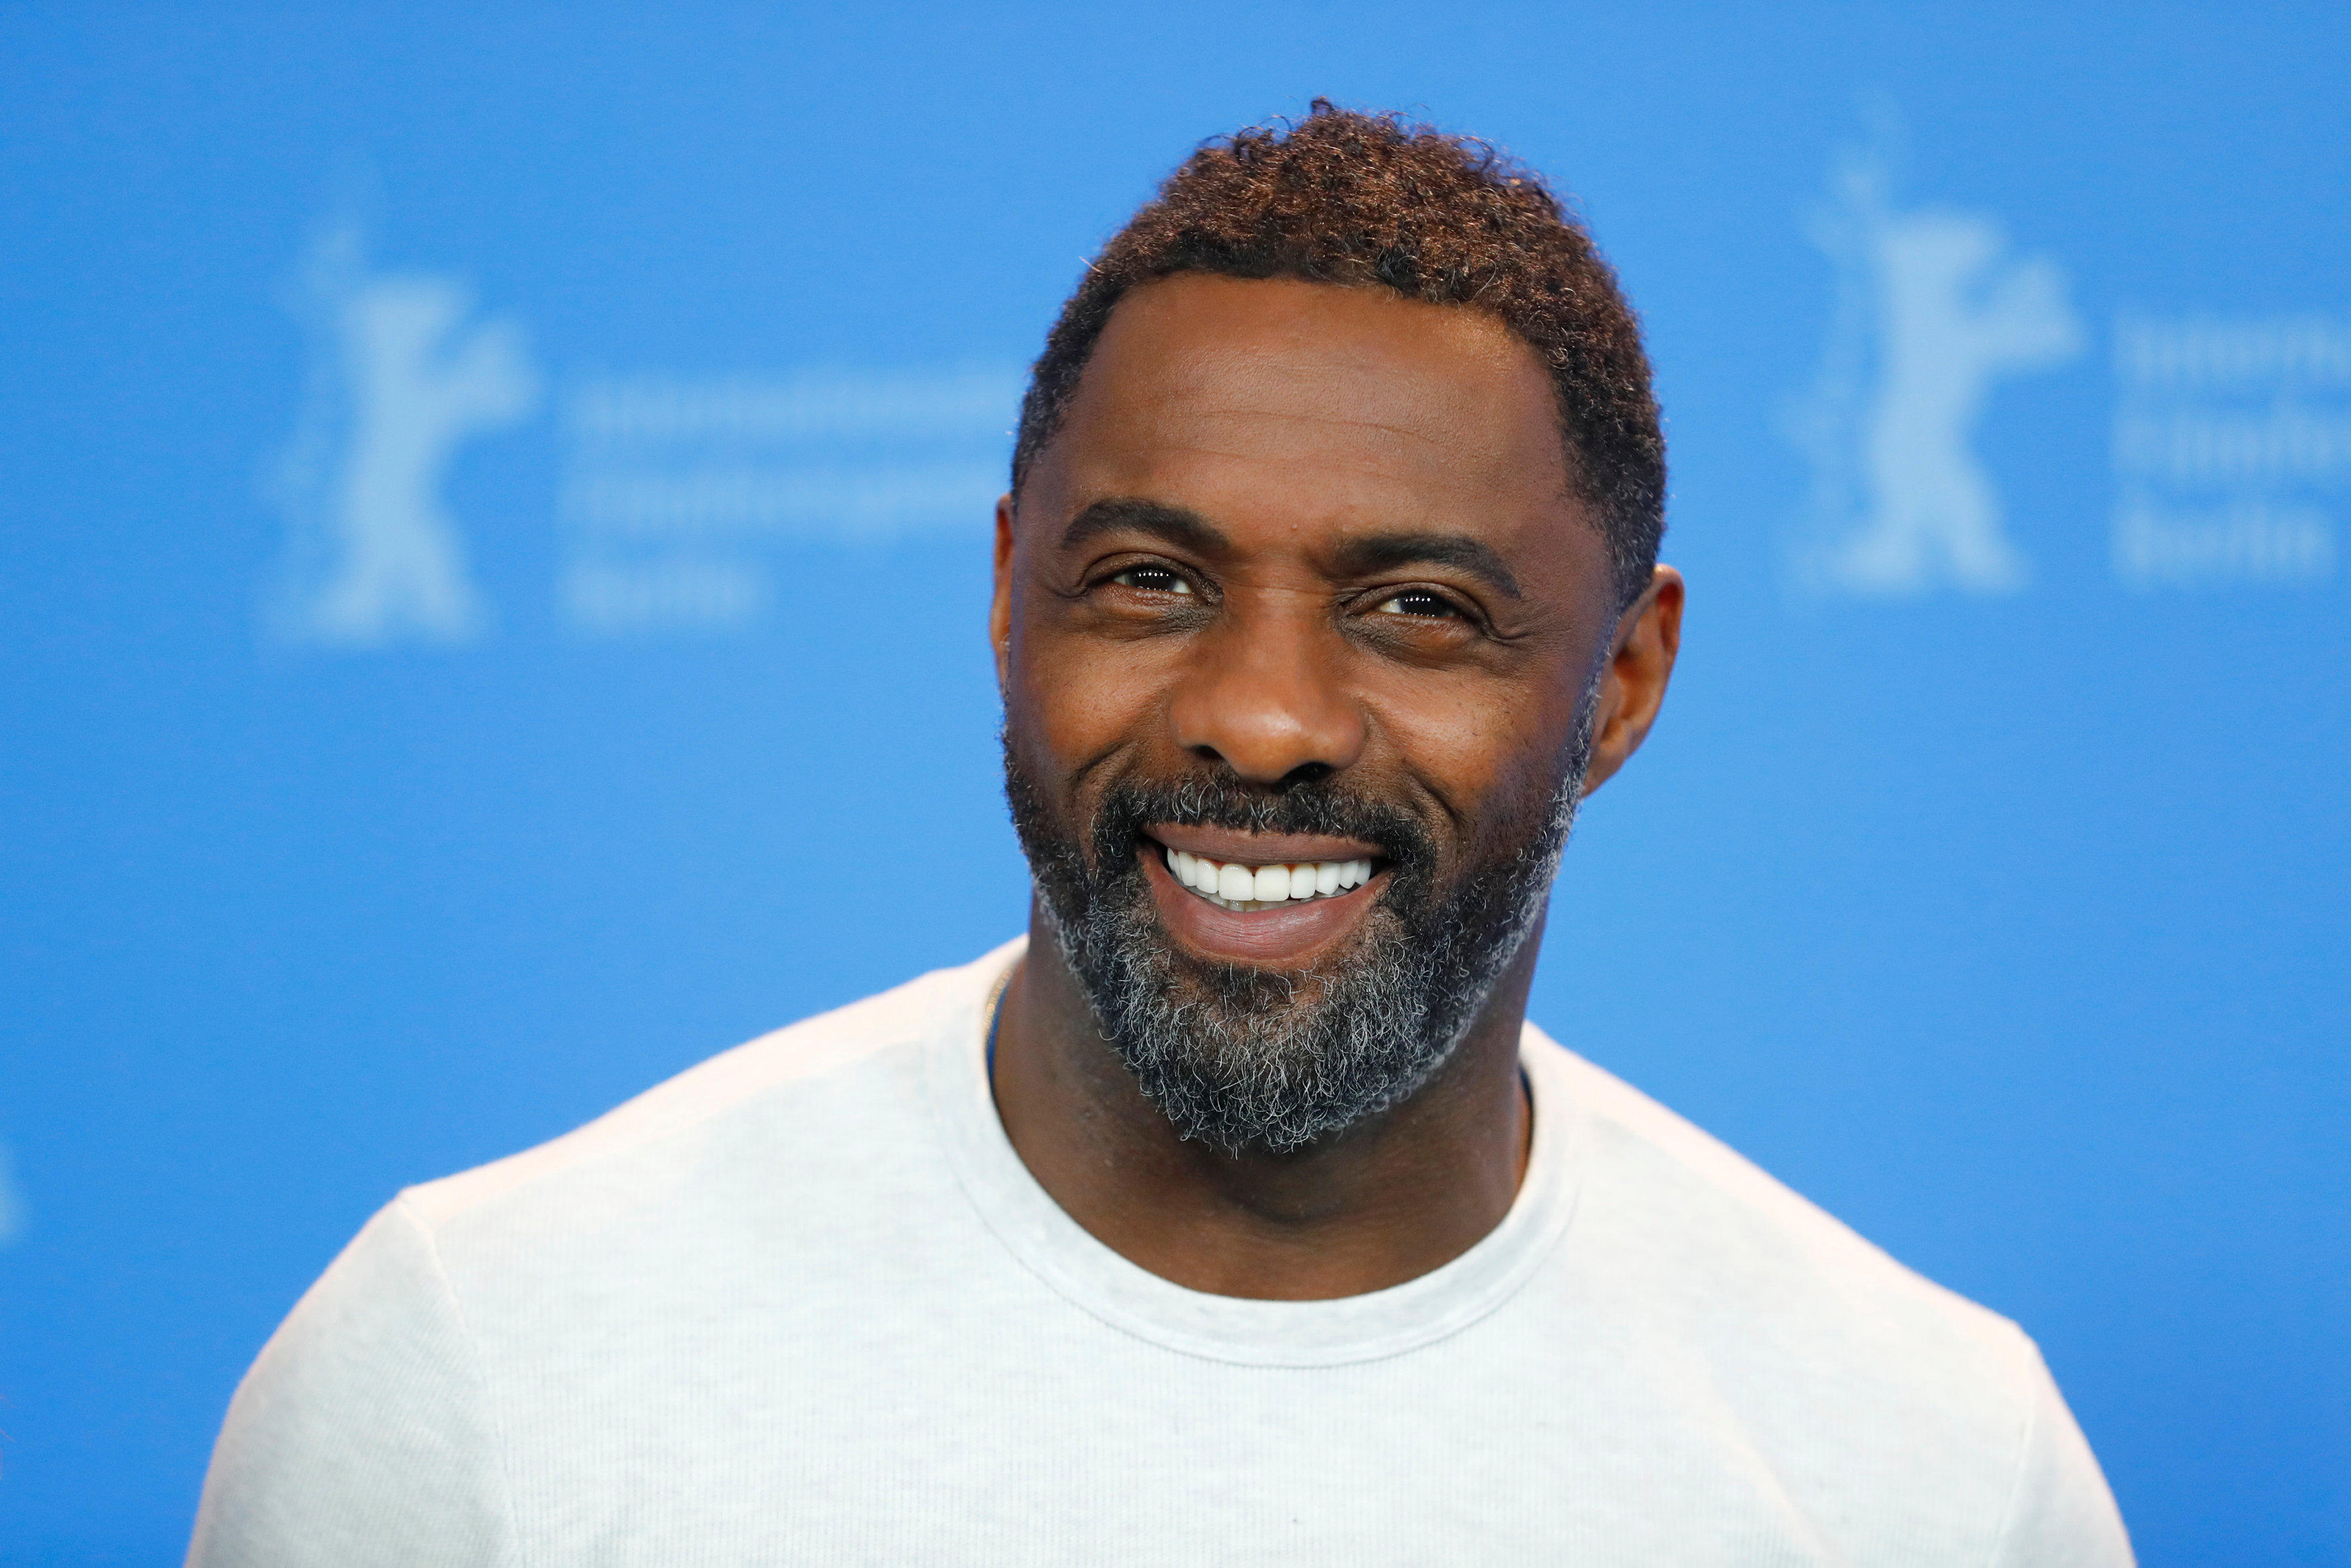 Idris Elba named this year's Sexiest Man Alive by People magazine CBS